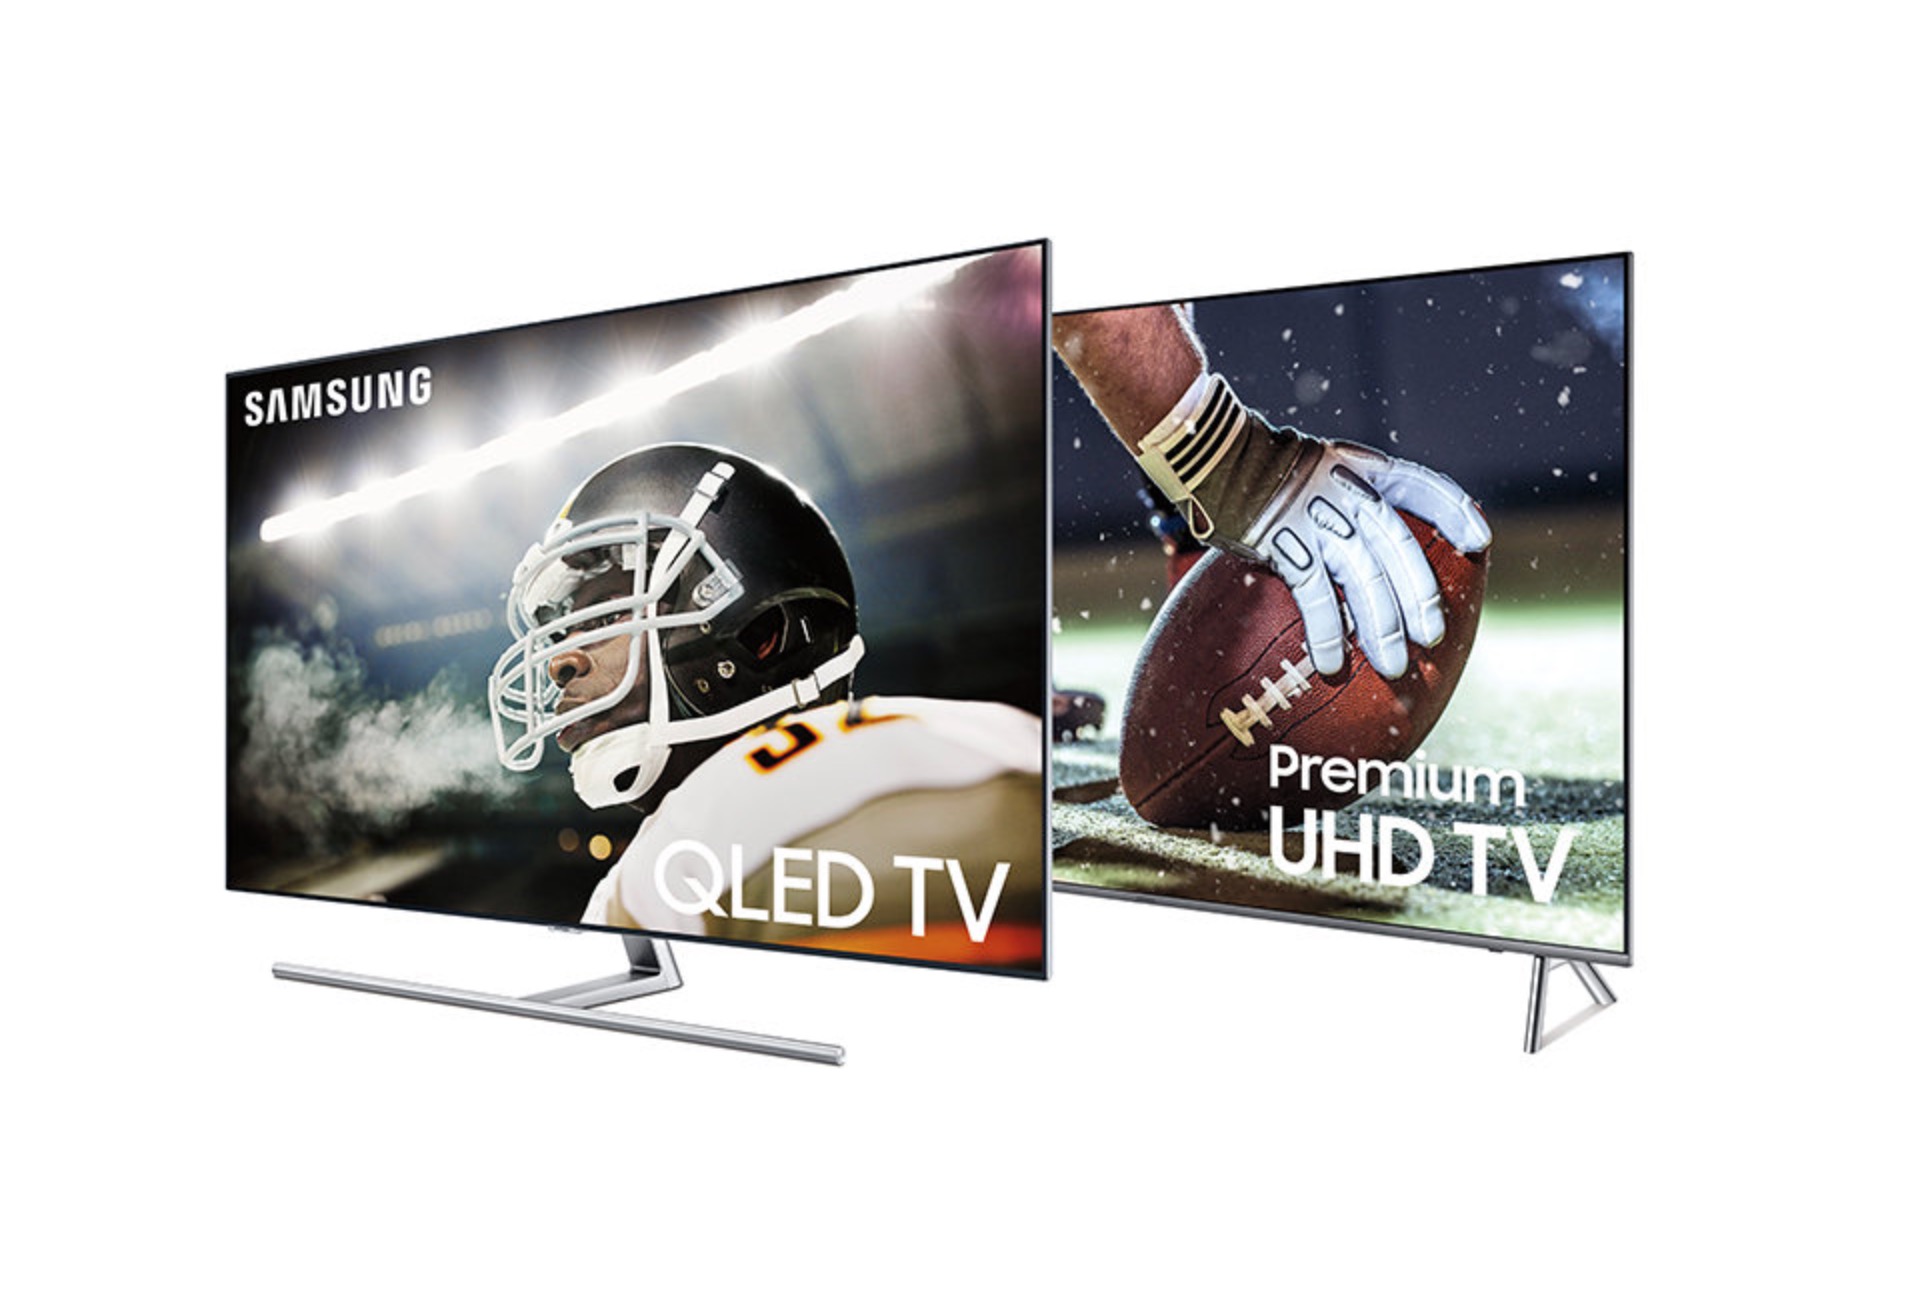 Samsung’s best 4K TVs are back down to Black Friday prices for Super